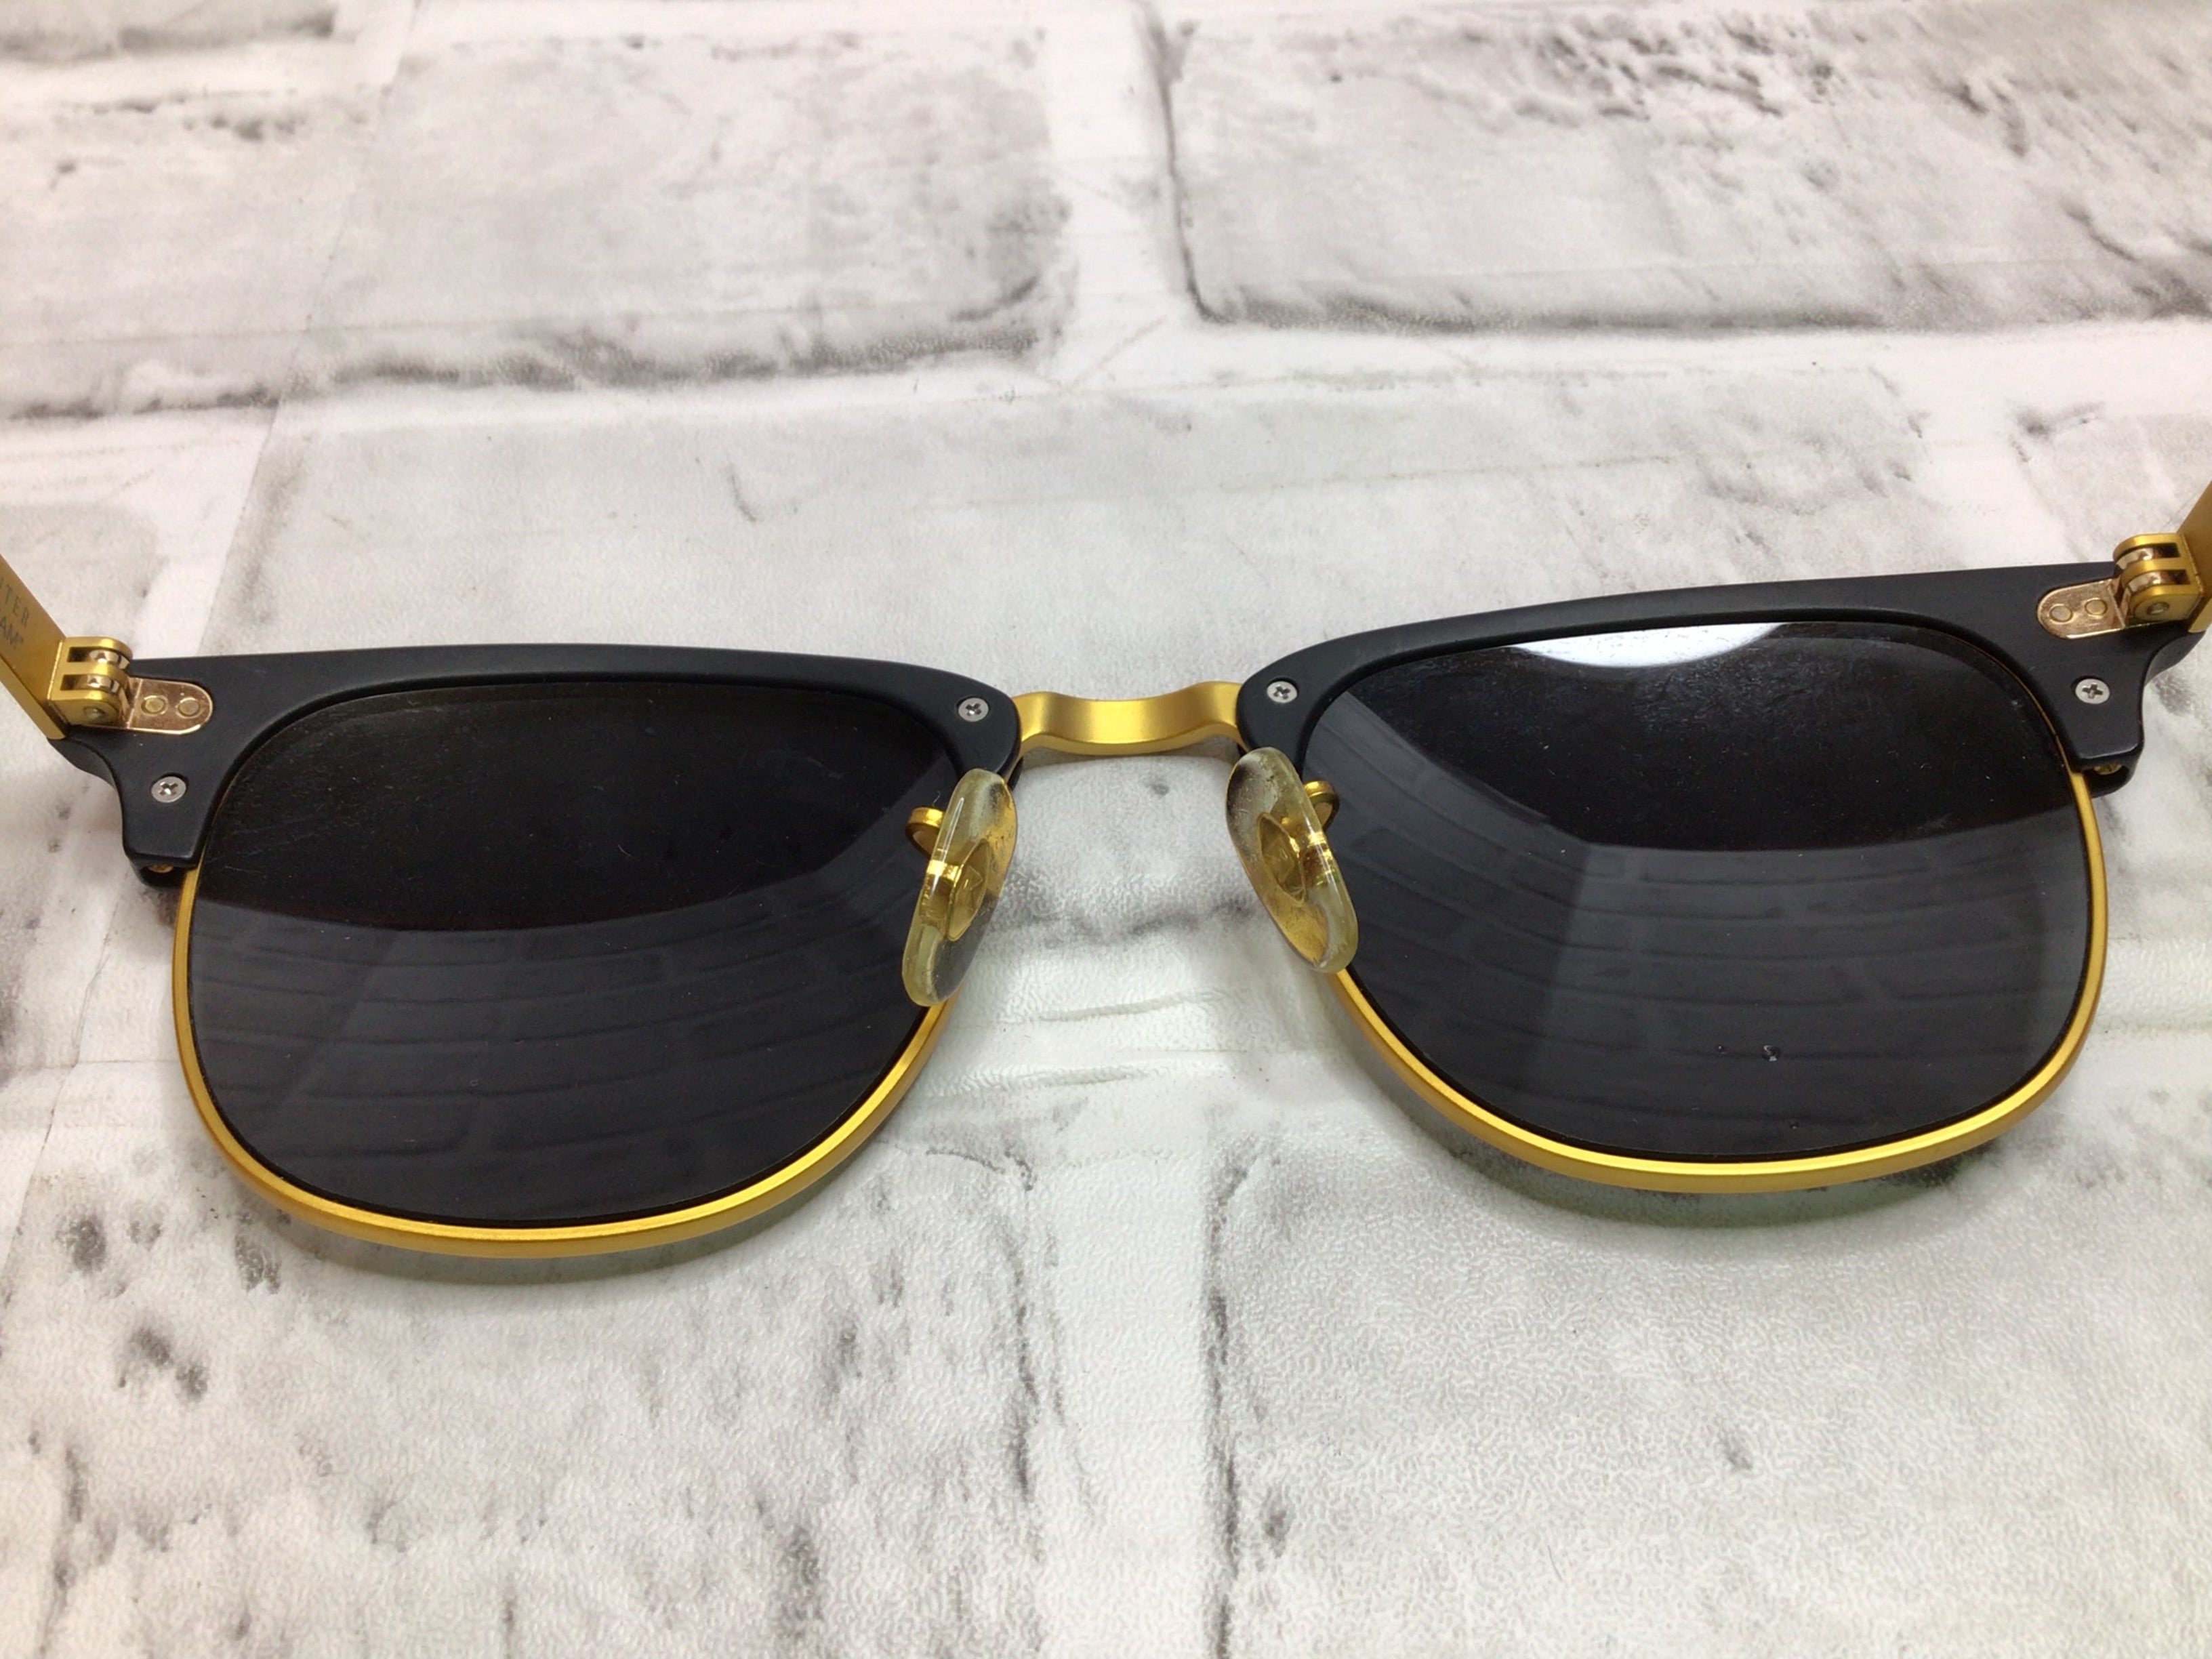 William Painter The Empire Gold Mens Sunglasses **RIGHT EYE LENS DAMAGE** (8079656288494)